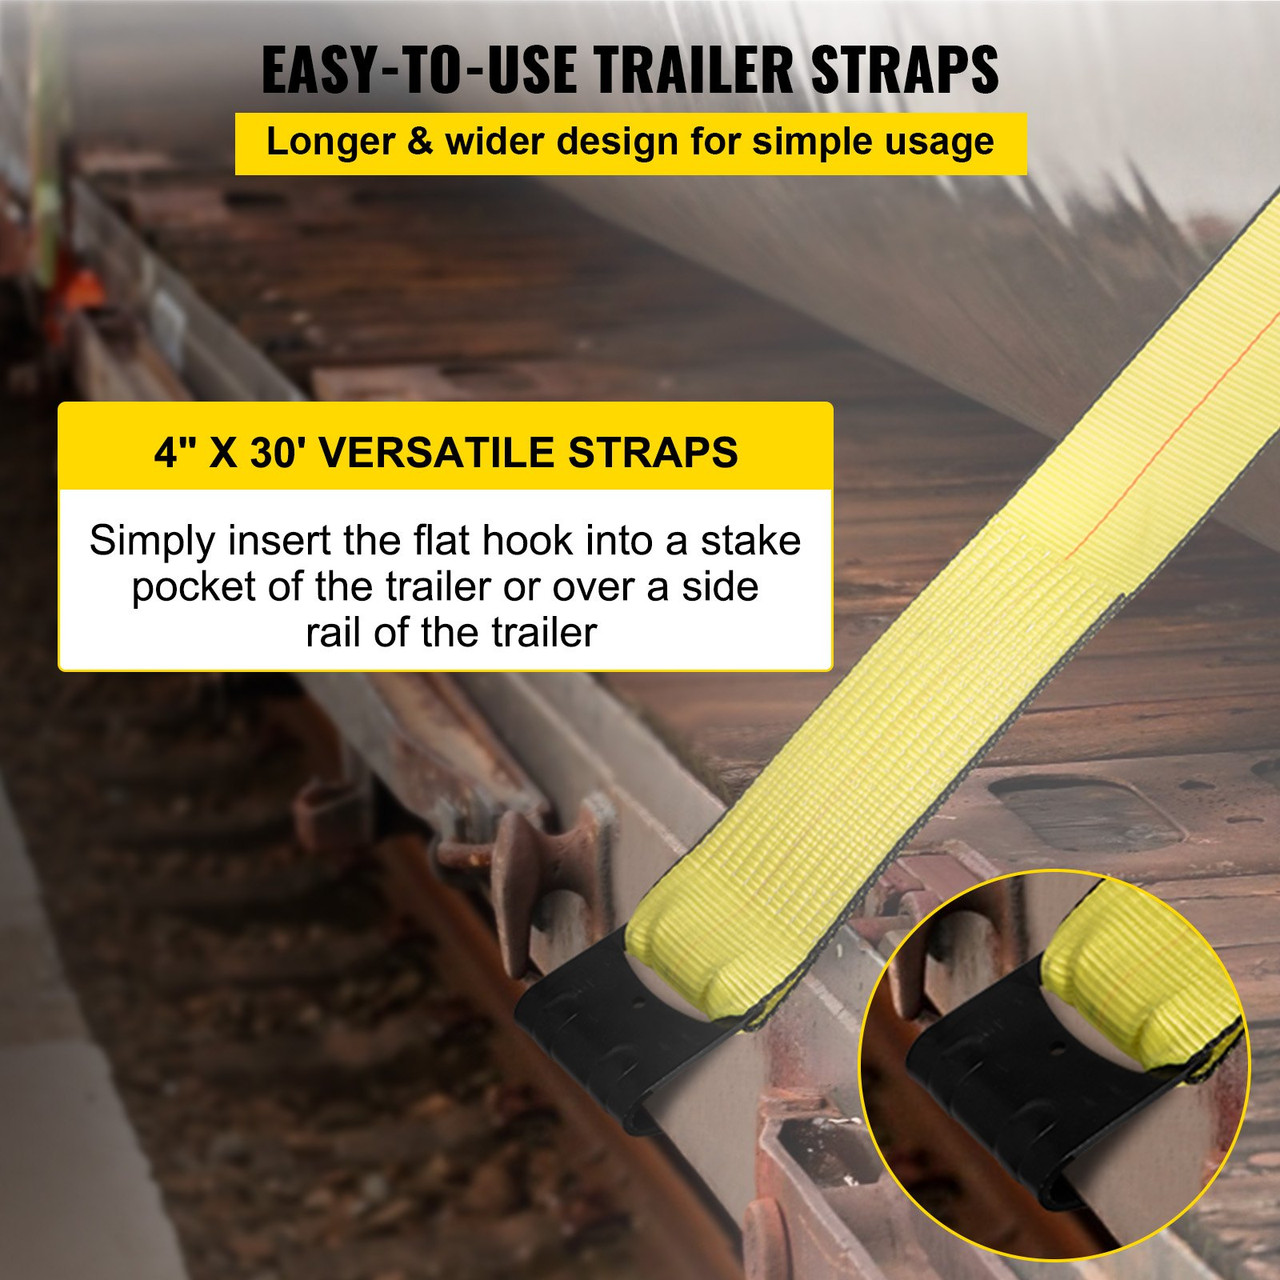 Truck Straps 4"x30' Winch Straps with a Flat Hook Flatbed Tie Downs 15400lbs Load Capacity Flatbed Strap Cargo Control for Flatbeds, Trucks, Trailers, Farms, Rescues, Tree Saver, Yellow(4 Pack)